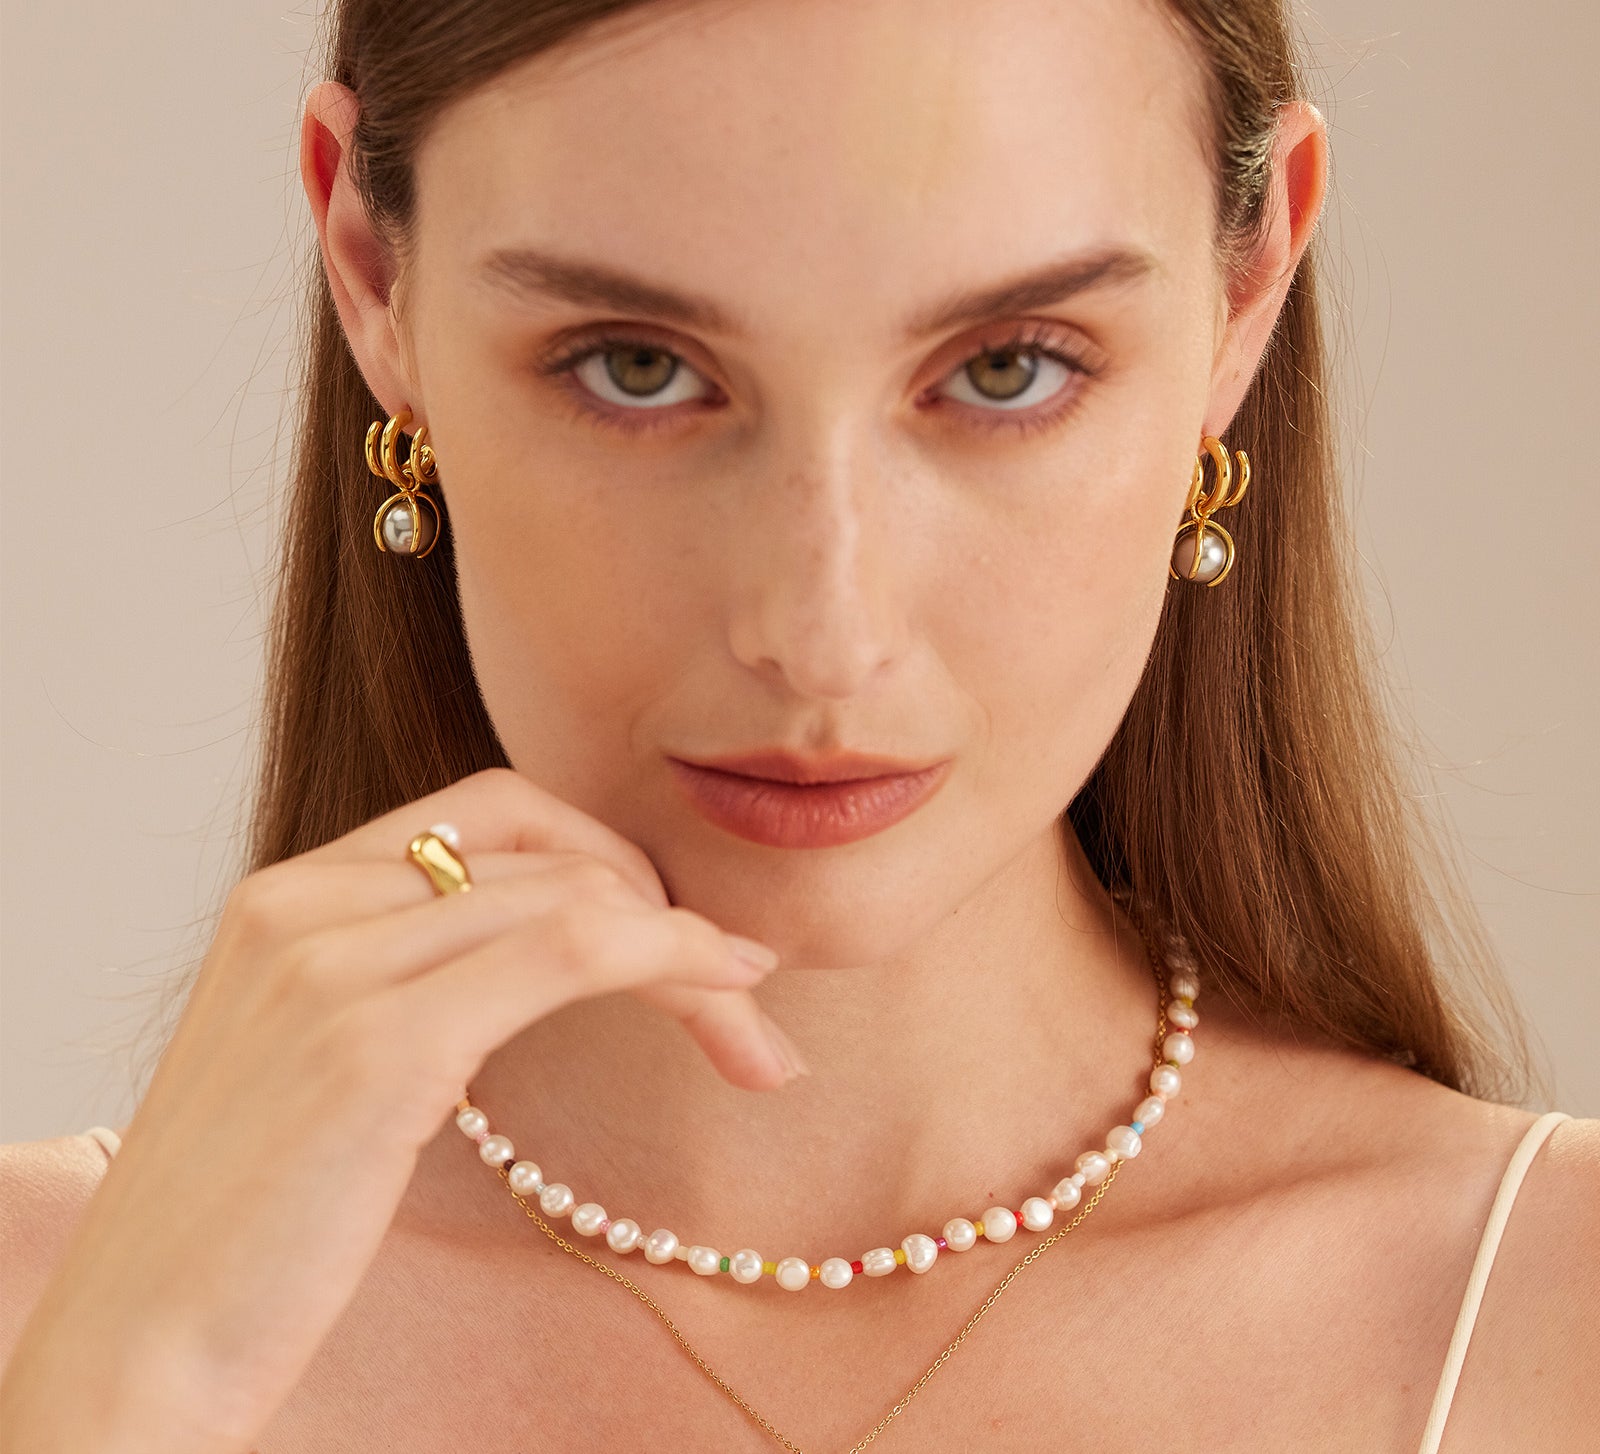  Fine Pearl Earrings featuring classic pearl adornments, these earrings offer a versatile and stylish accessory that complements any outfit with grace